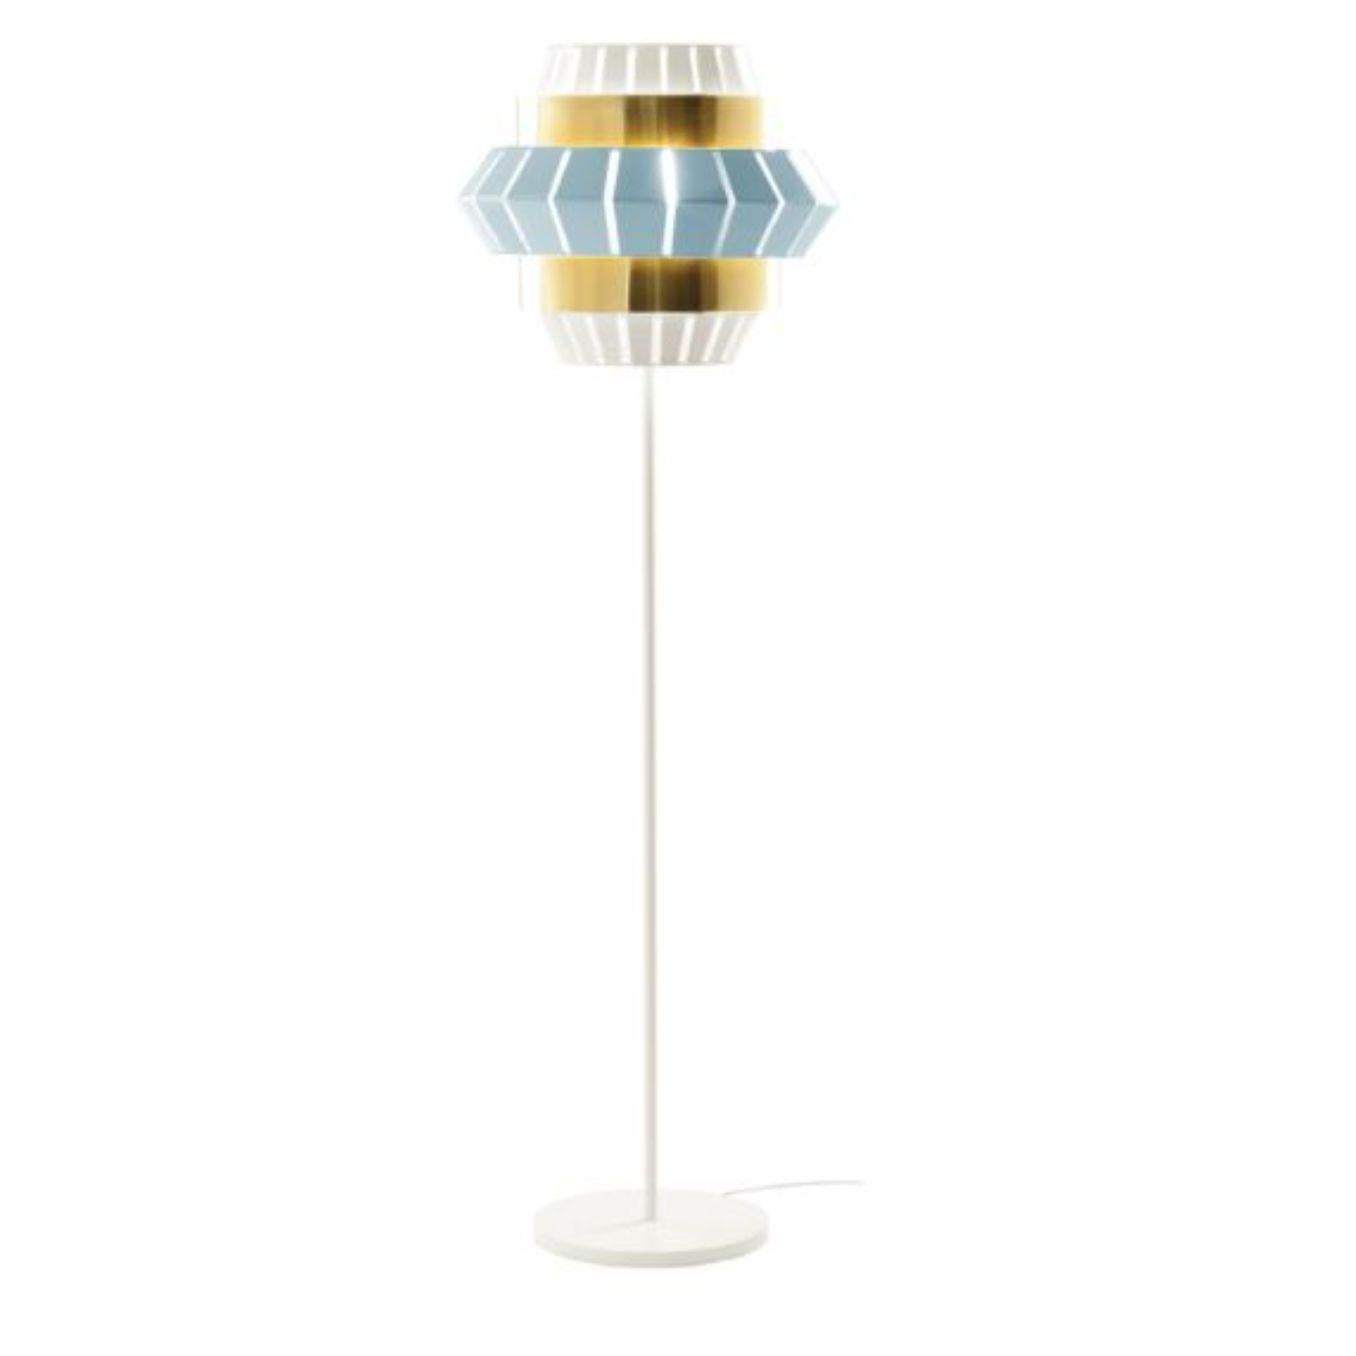 Ivory and jade comb floor lamp with brass ring by Dooq.
Dimensions: W 54 x D 54 x H 175 cm
Materials: lacquered metal, polished brass.
Also available in different colors and materials.

Information:
230V/50Hz
E27/1x20W LED
120V/60Hz
E26/1x15W